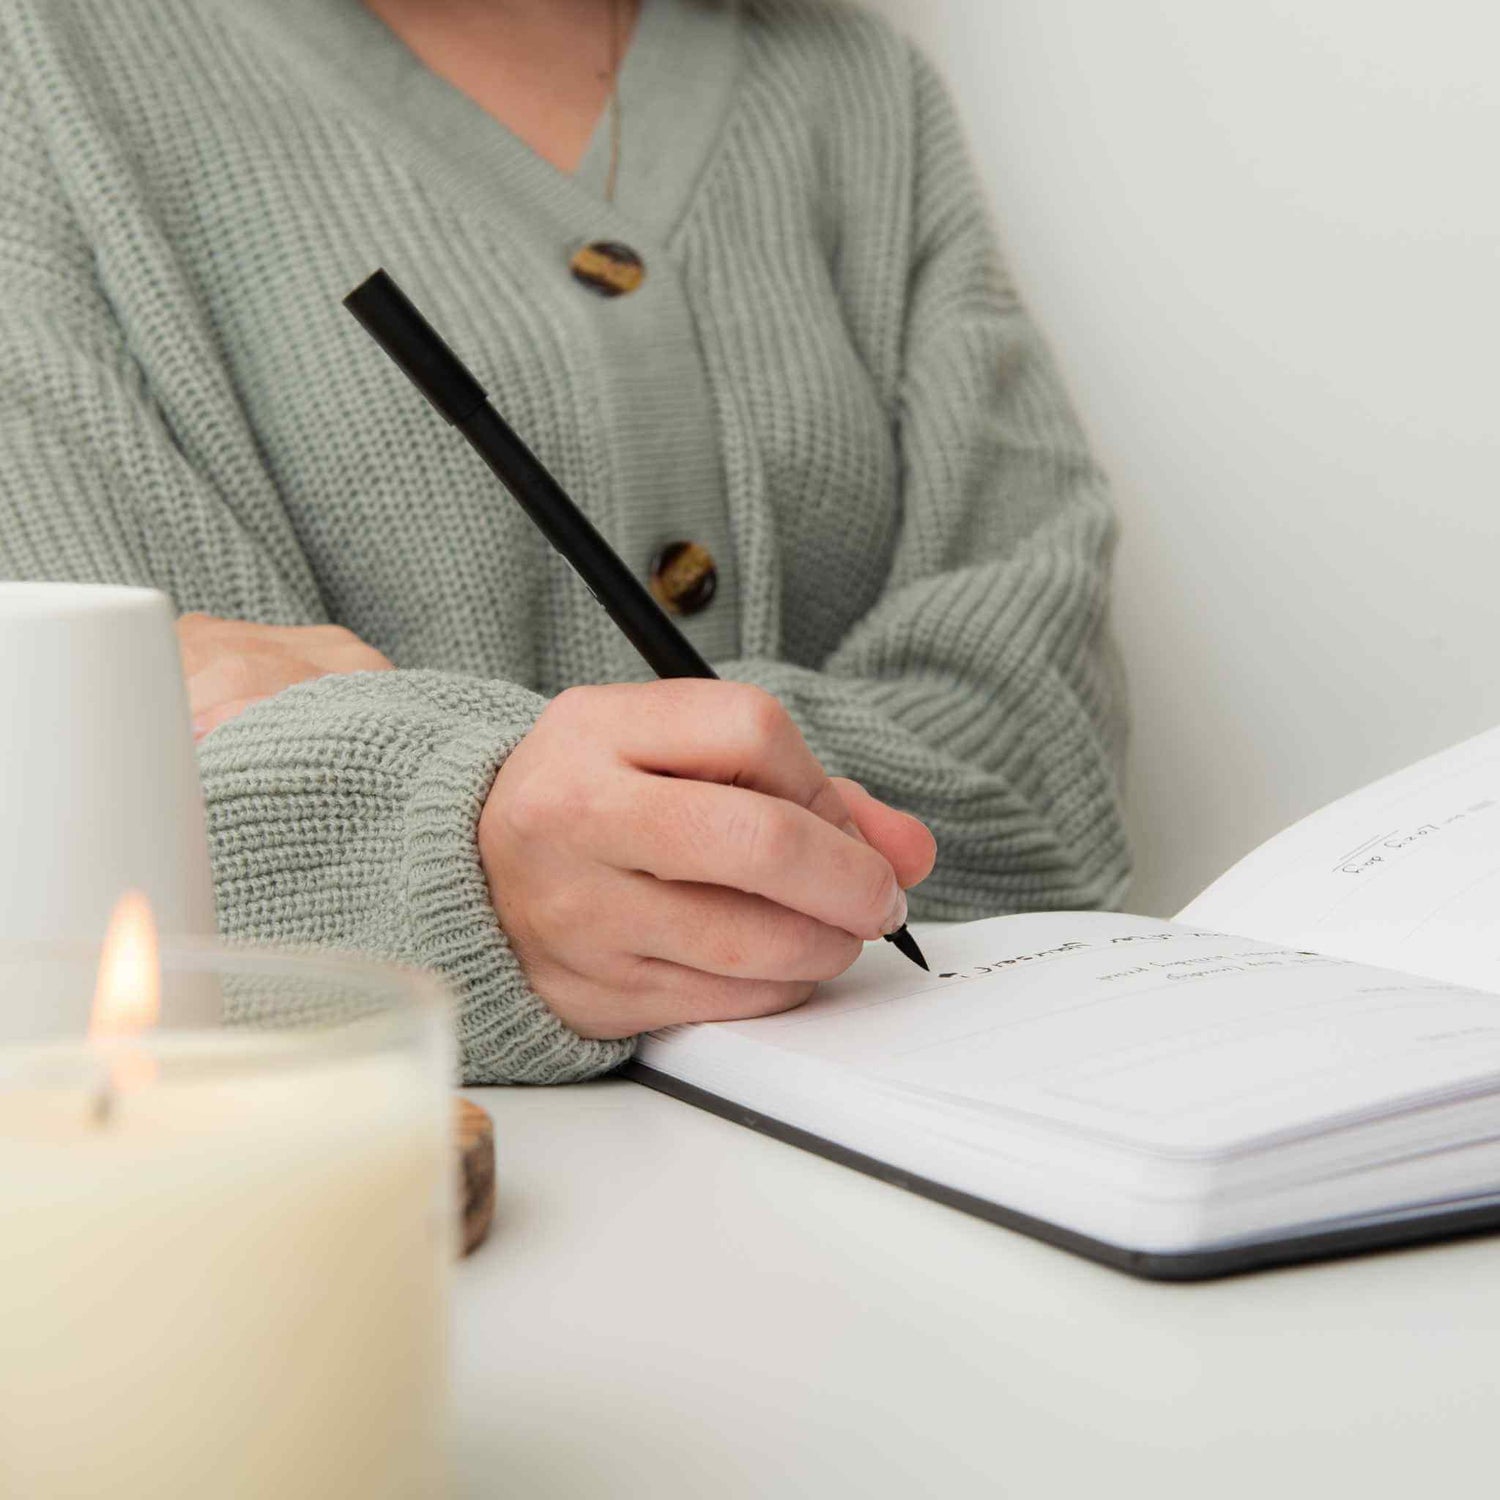 Image of woman writing in a journal with lit candle